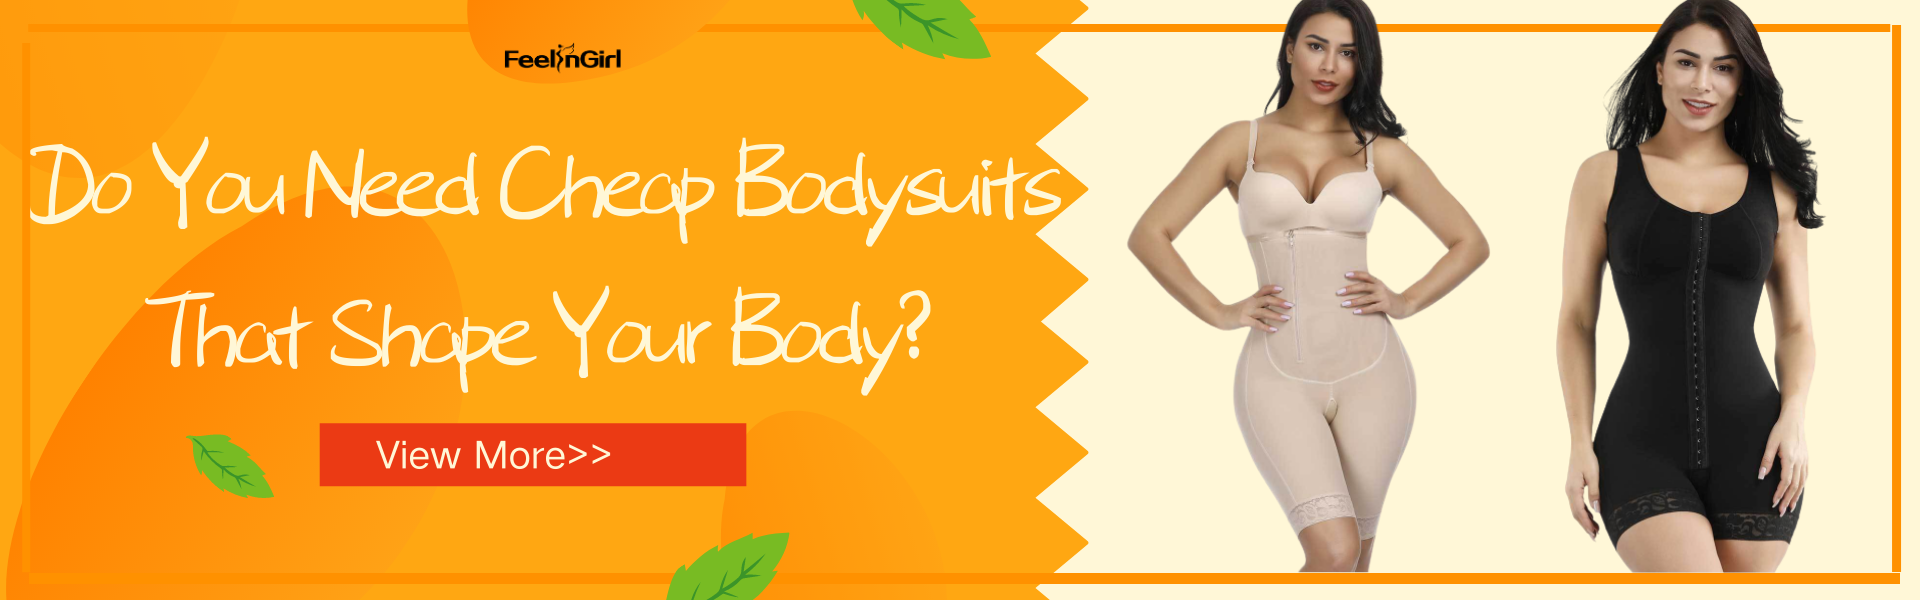 Do You Need Cheap Bodysuits That Shape Your Body?